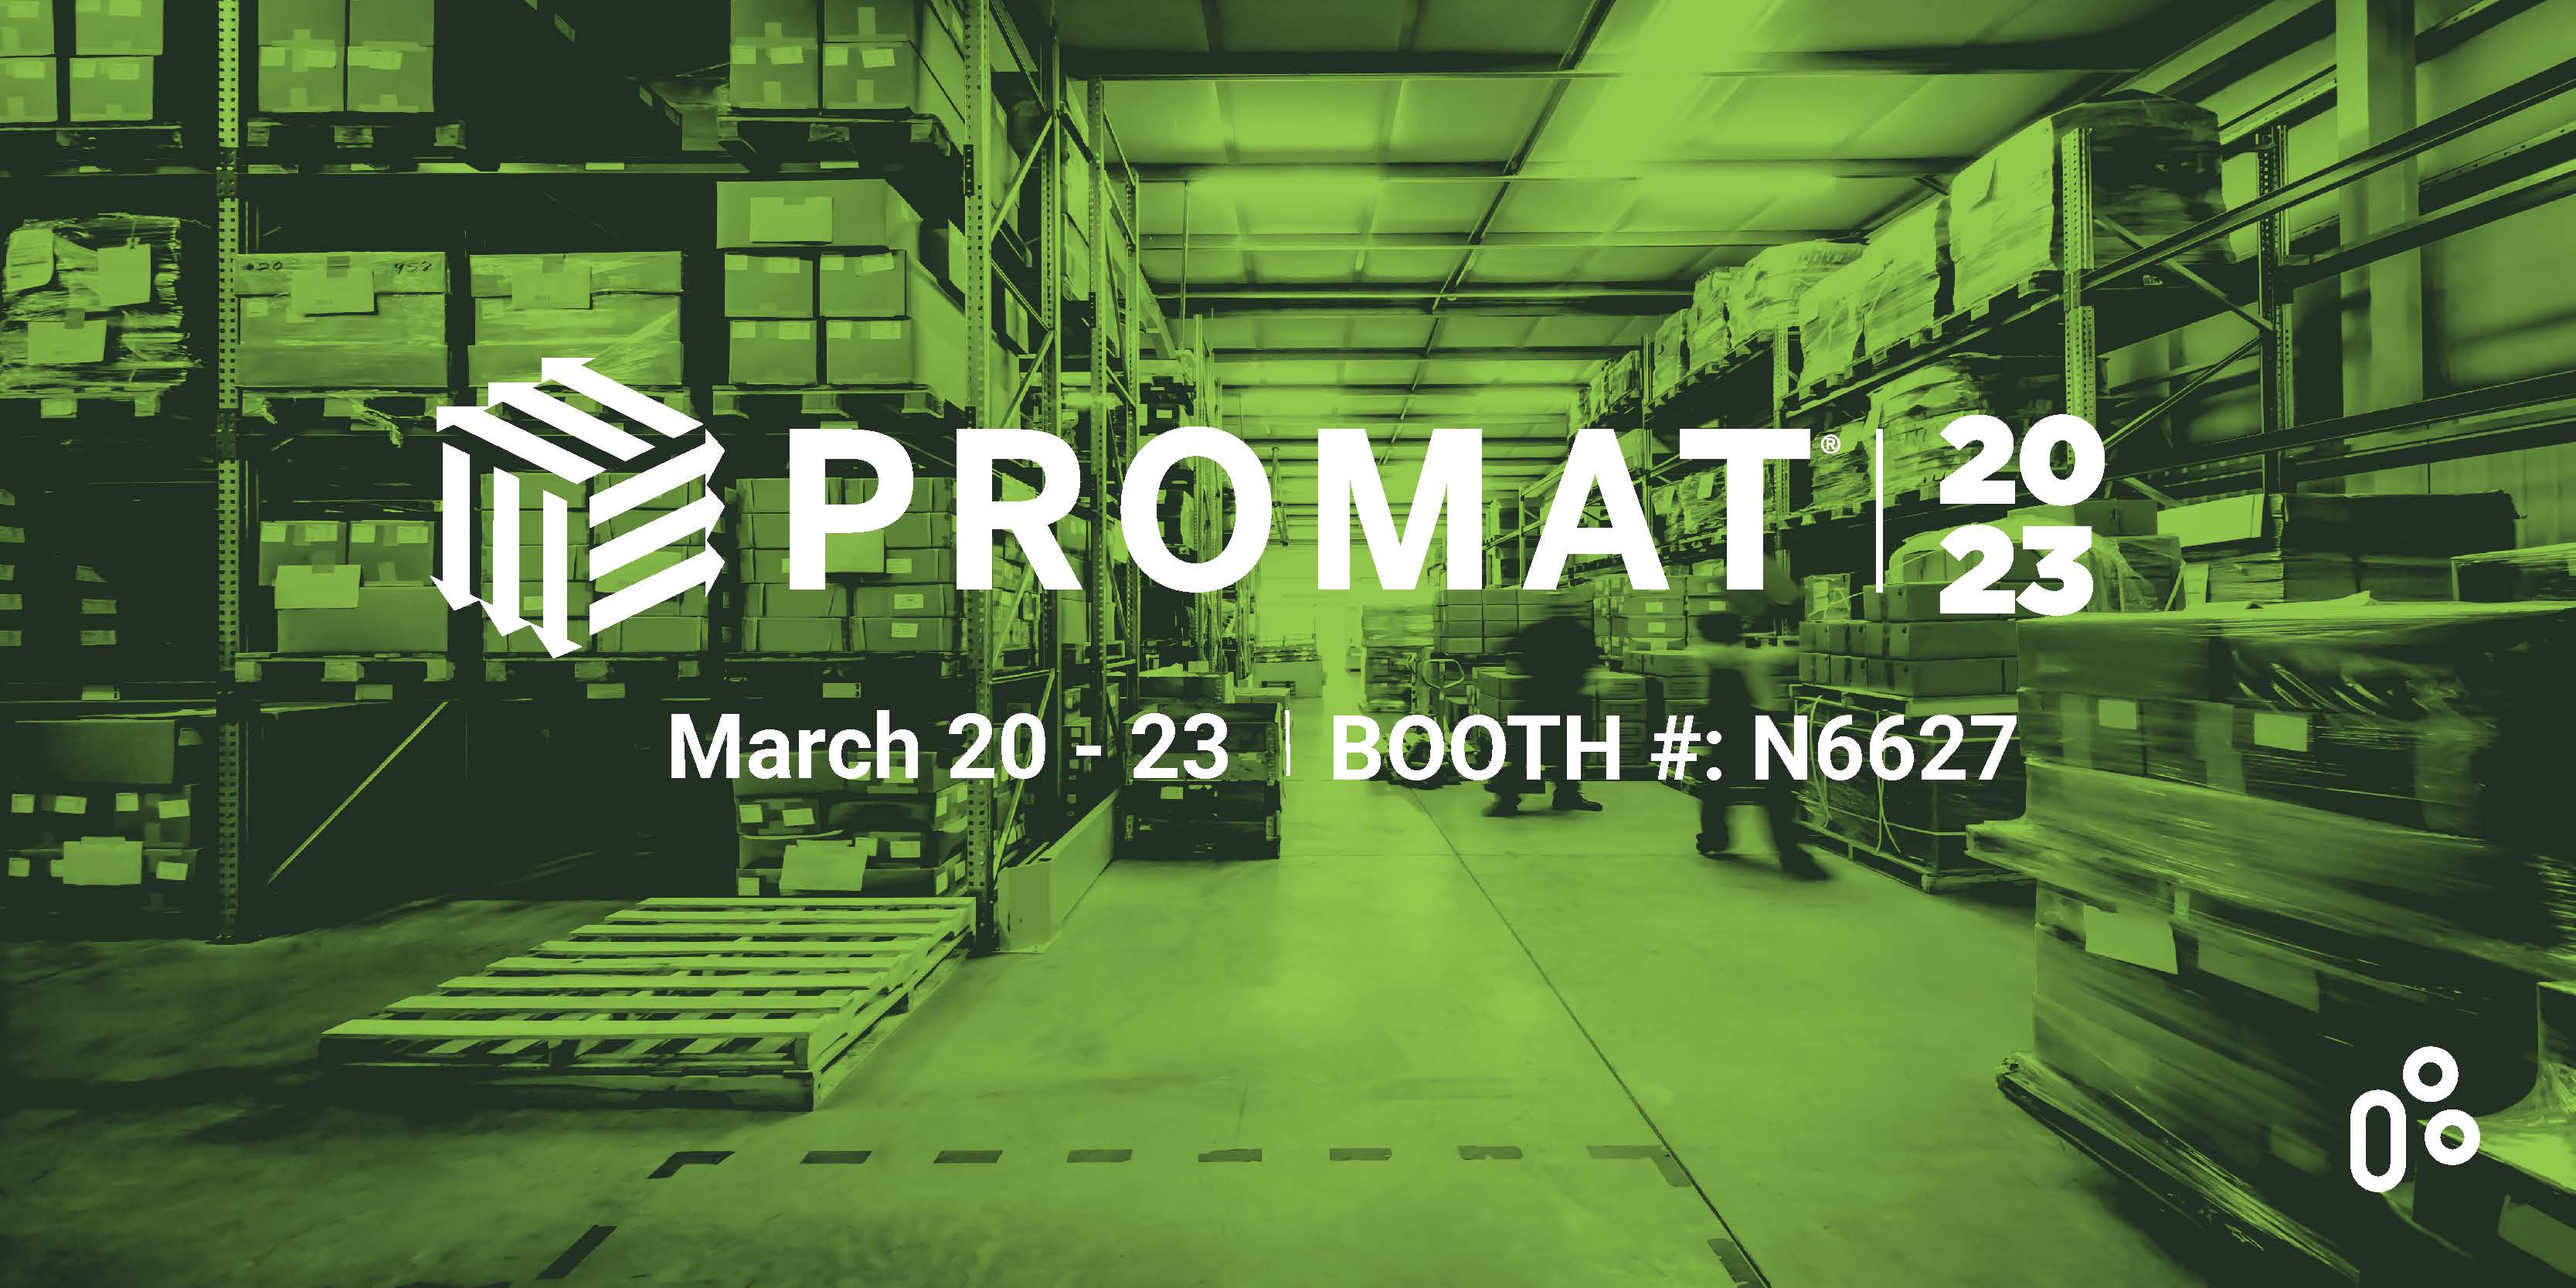 TiMOTION Exhibits at ProMat 2023 Expo March 2023 in Chicago TiMOTION